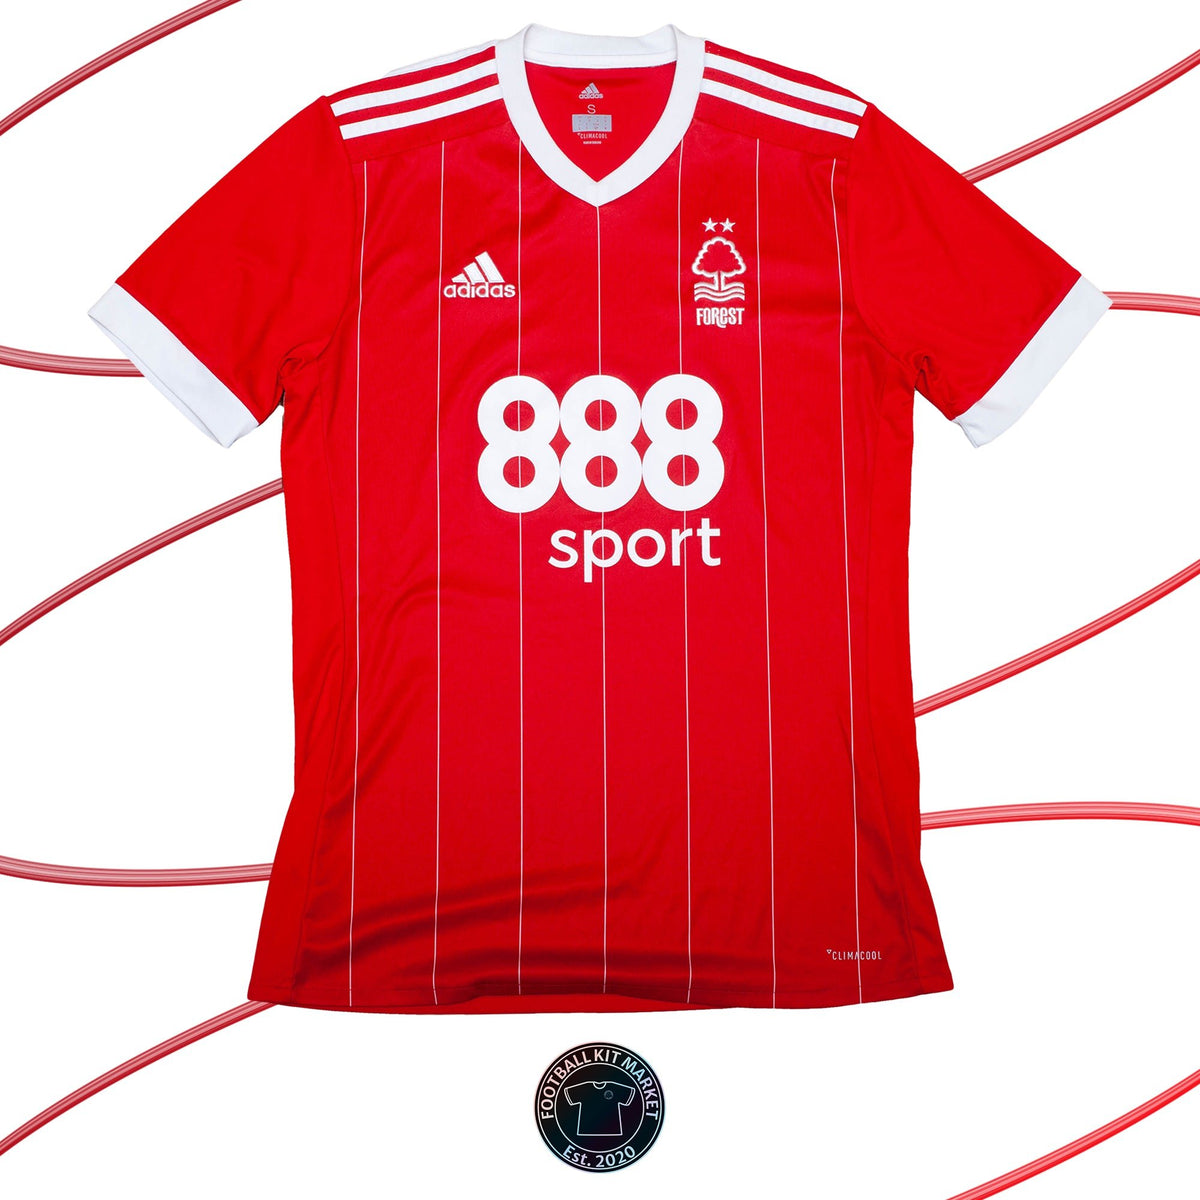 Genuine NOTTINGHAM FOREST Home Shirt (2017-2018) - ADIDAS (S) - Product Image from Football Kit Market